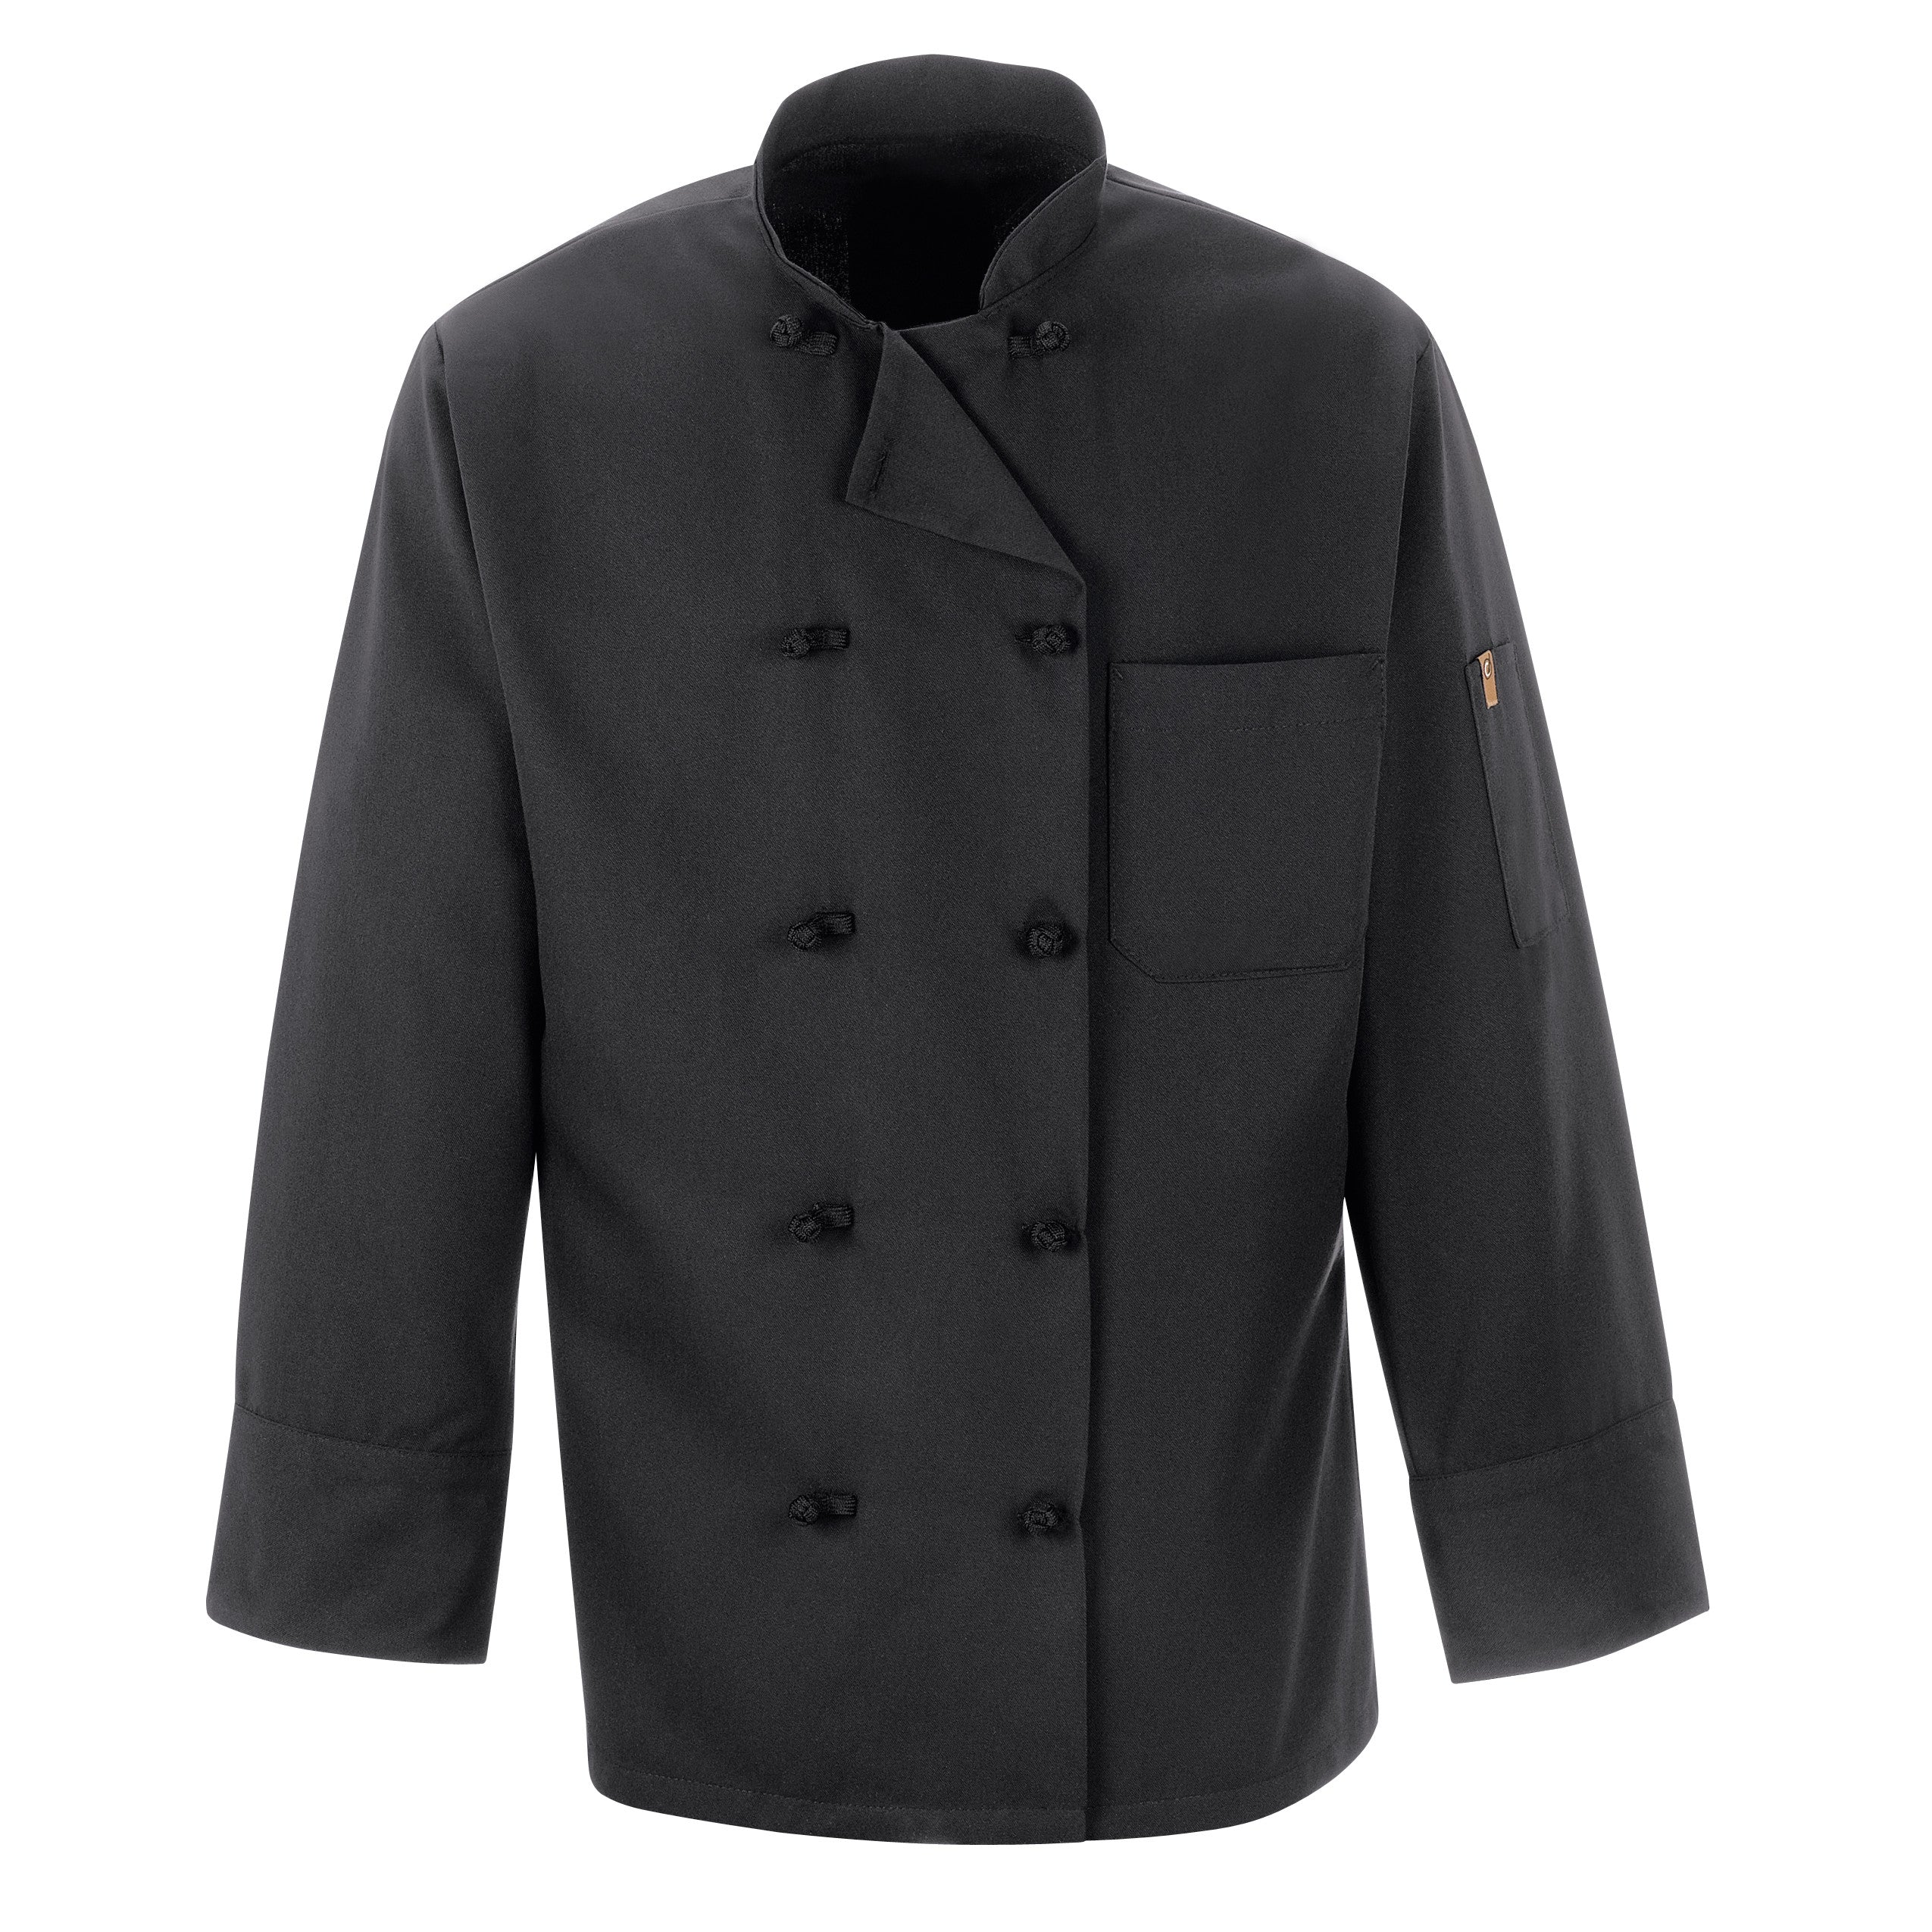 Black Chef Coat Ten Knot Buttons 0427 - Black-eSafety Supplies, Inc